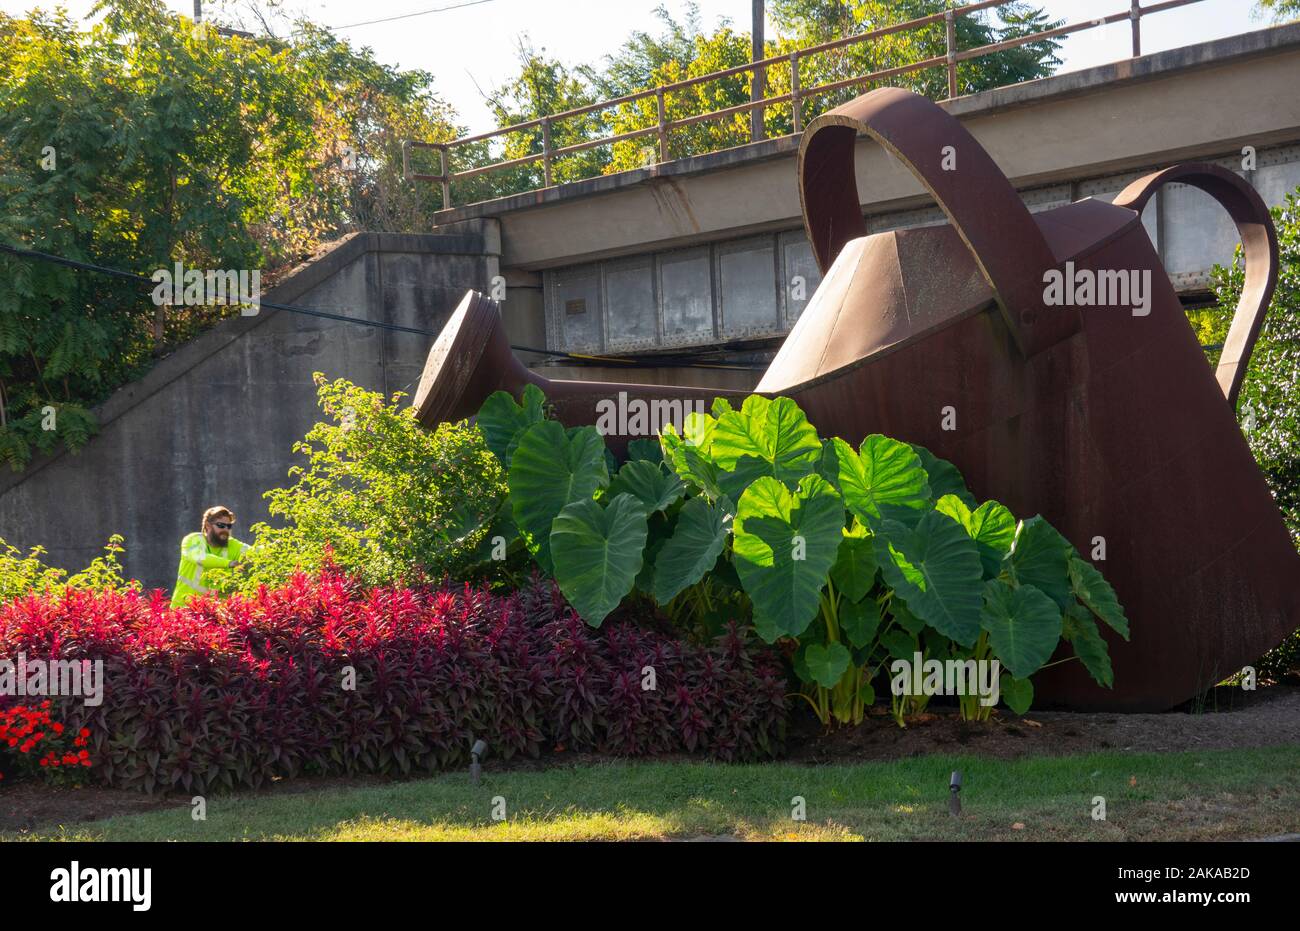 Giant Watering Can with flowers Staunton Virginia Stock Photo